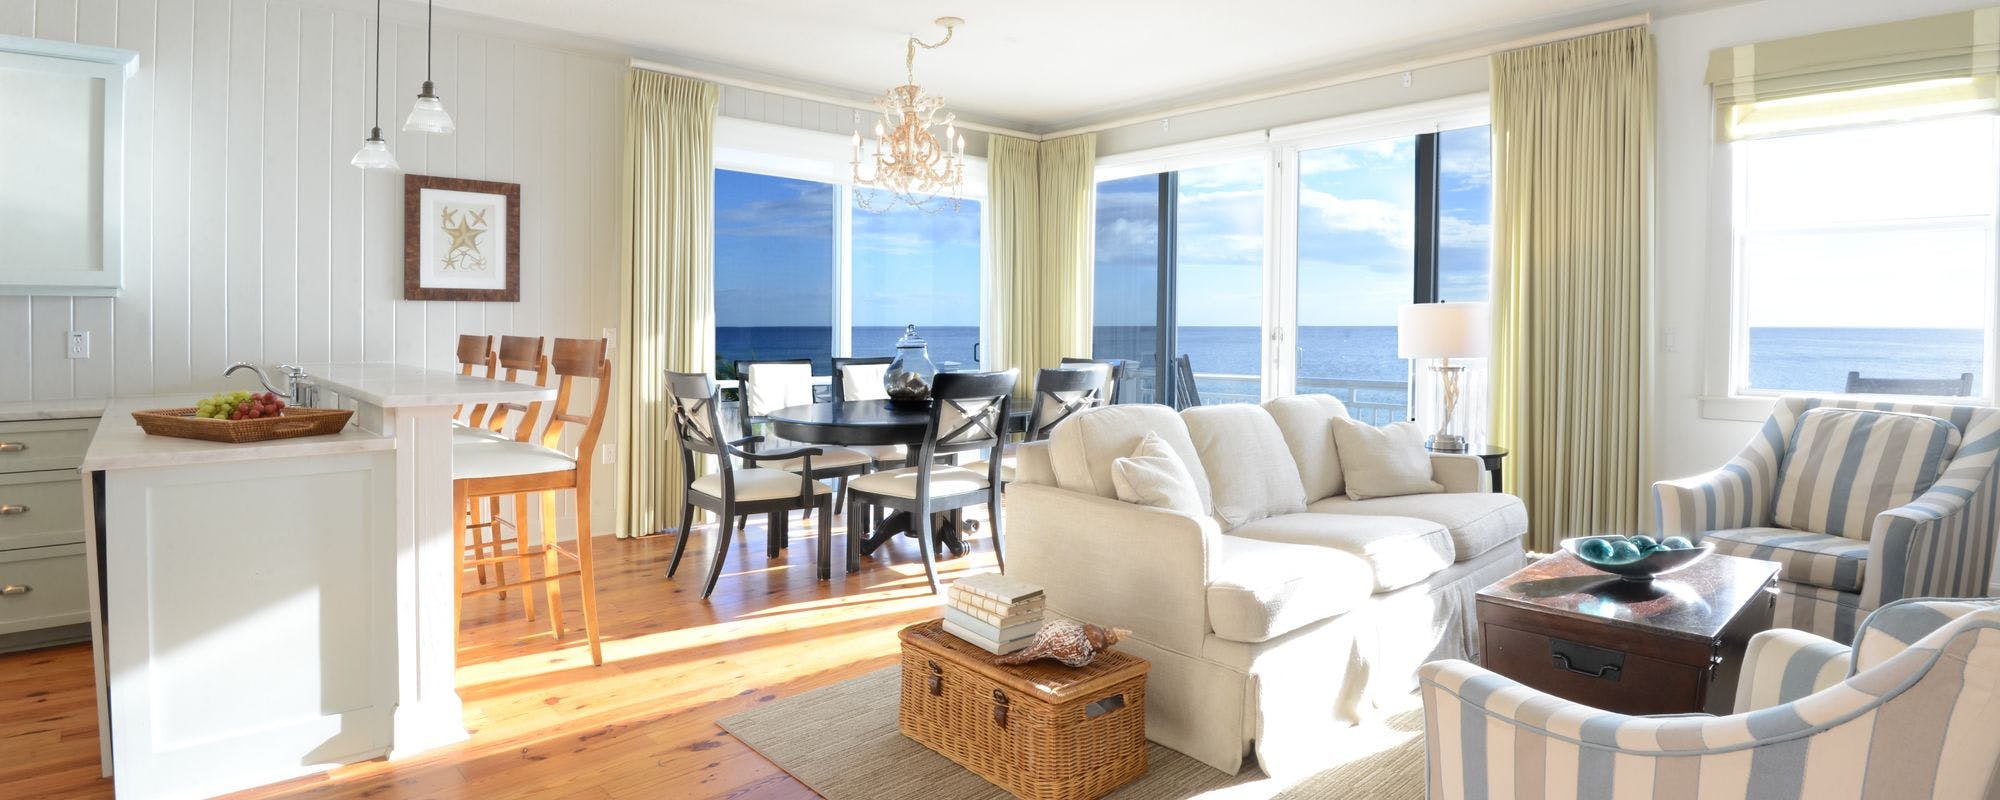 Bright and open living space with a view at an Anna Maria Island vacation rental.